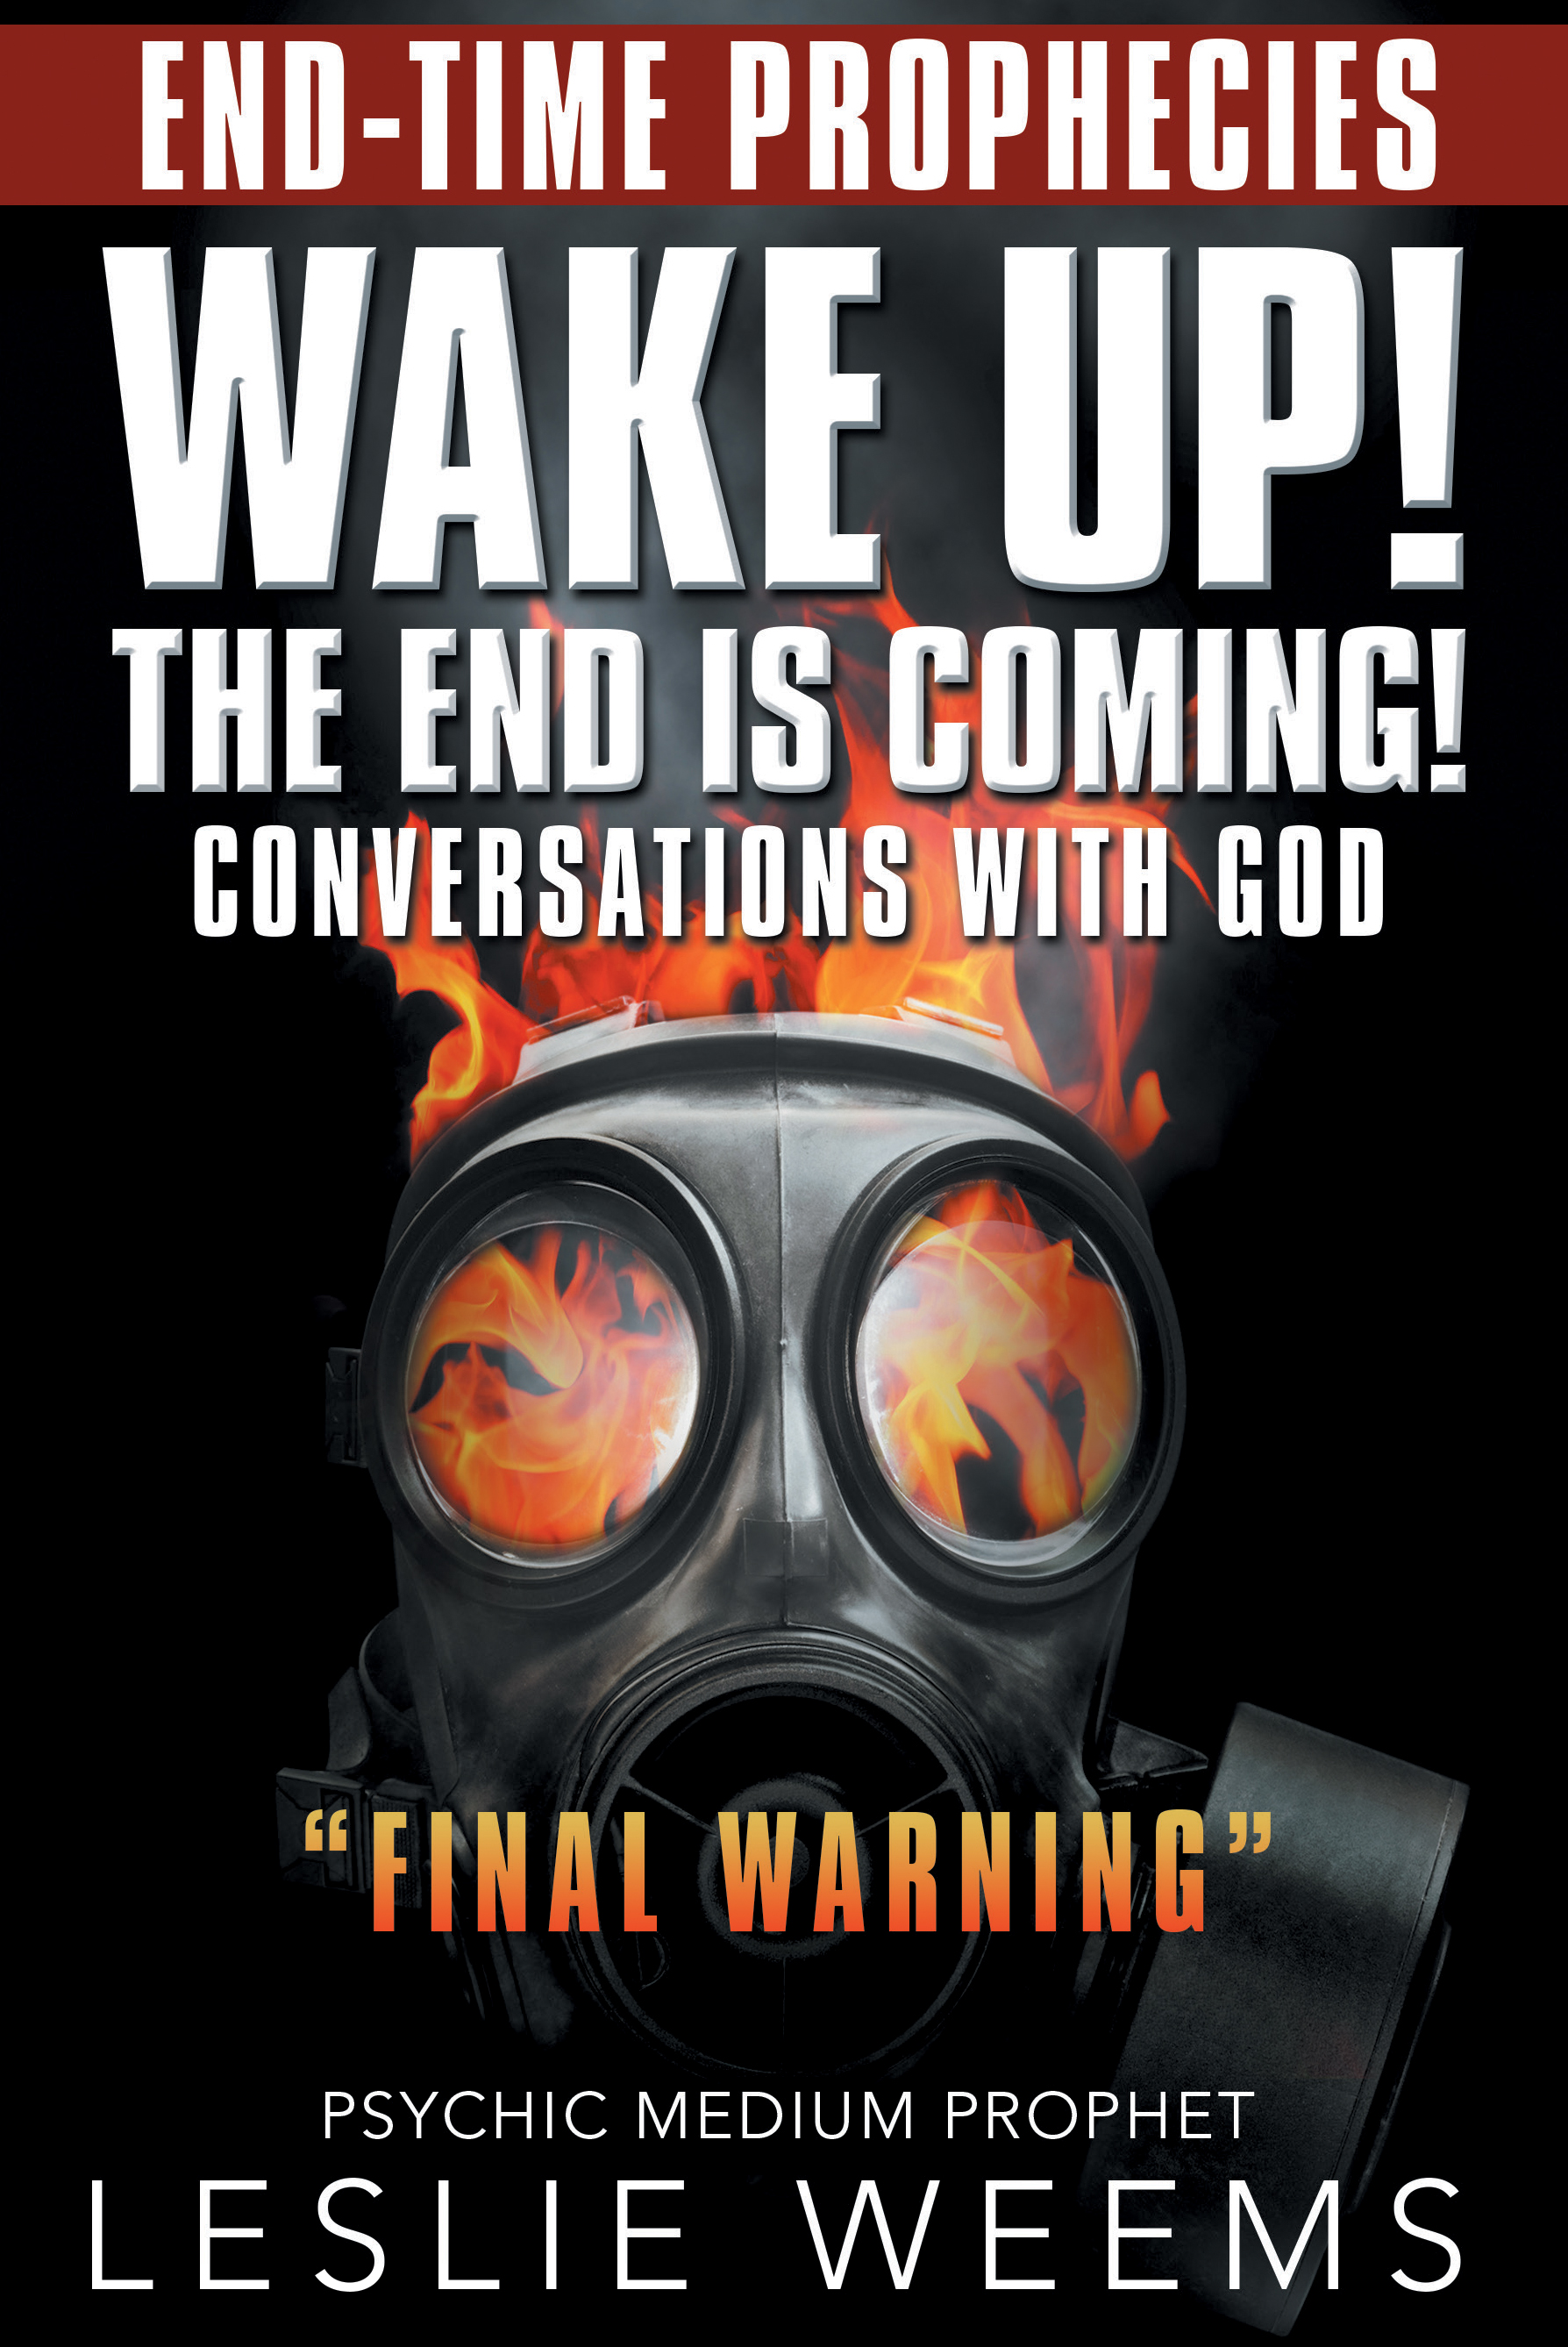 “Wake Up! the End Is Coming!: Conversations with God – ‘Final Warning’ End-Time Prophecies” by Leslie Weems
